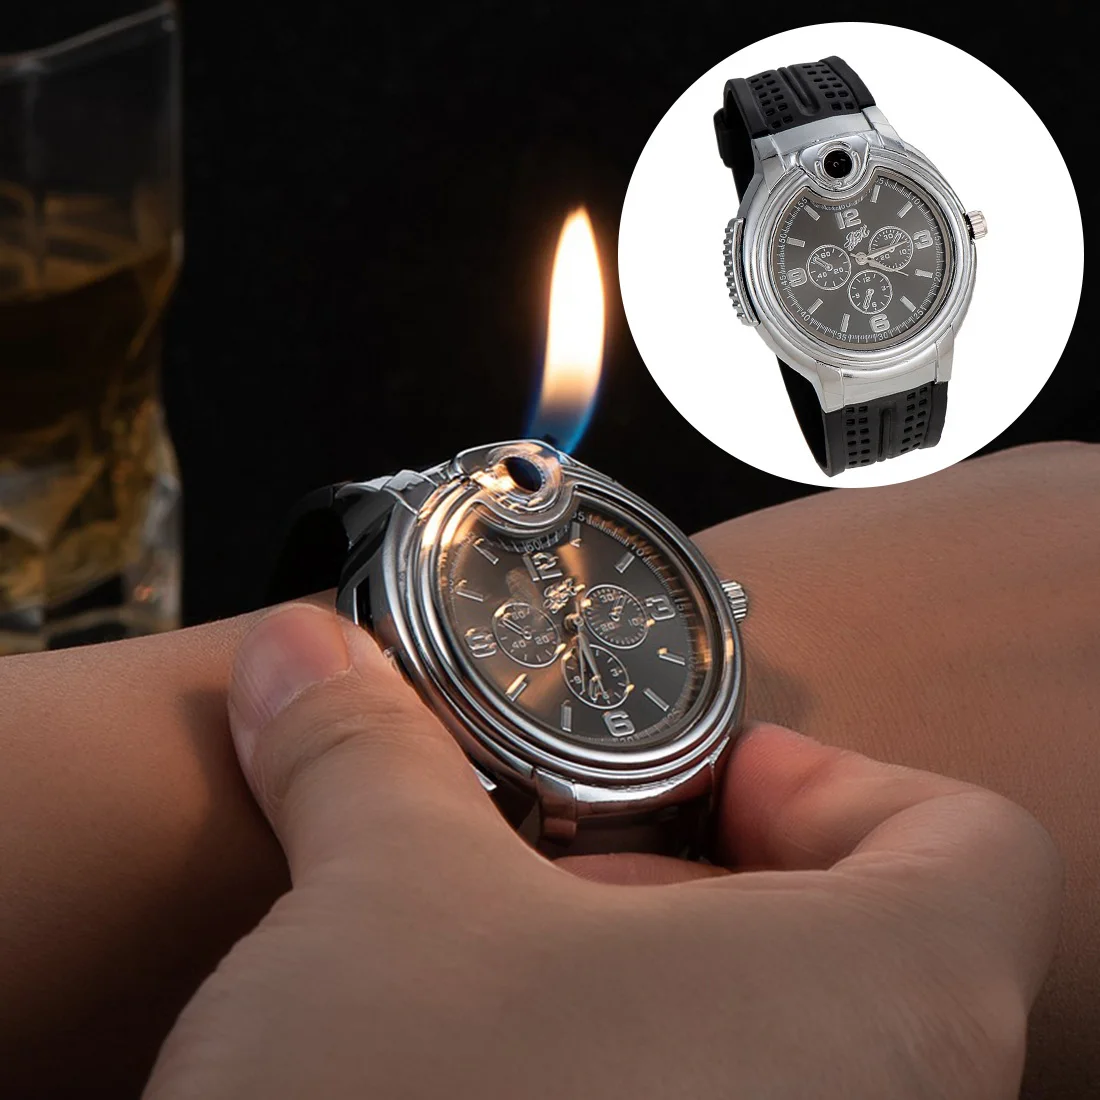 Watch Watch Style Metal Open Flame Lighter Creative Men ' s Sports Open Flame Watch Lighter Dmuchany Regulowany Fmale Encendedor